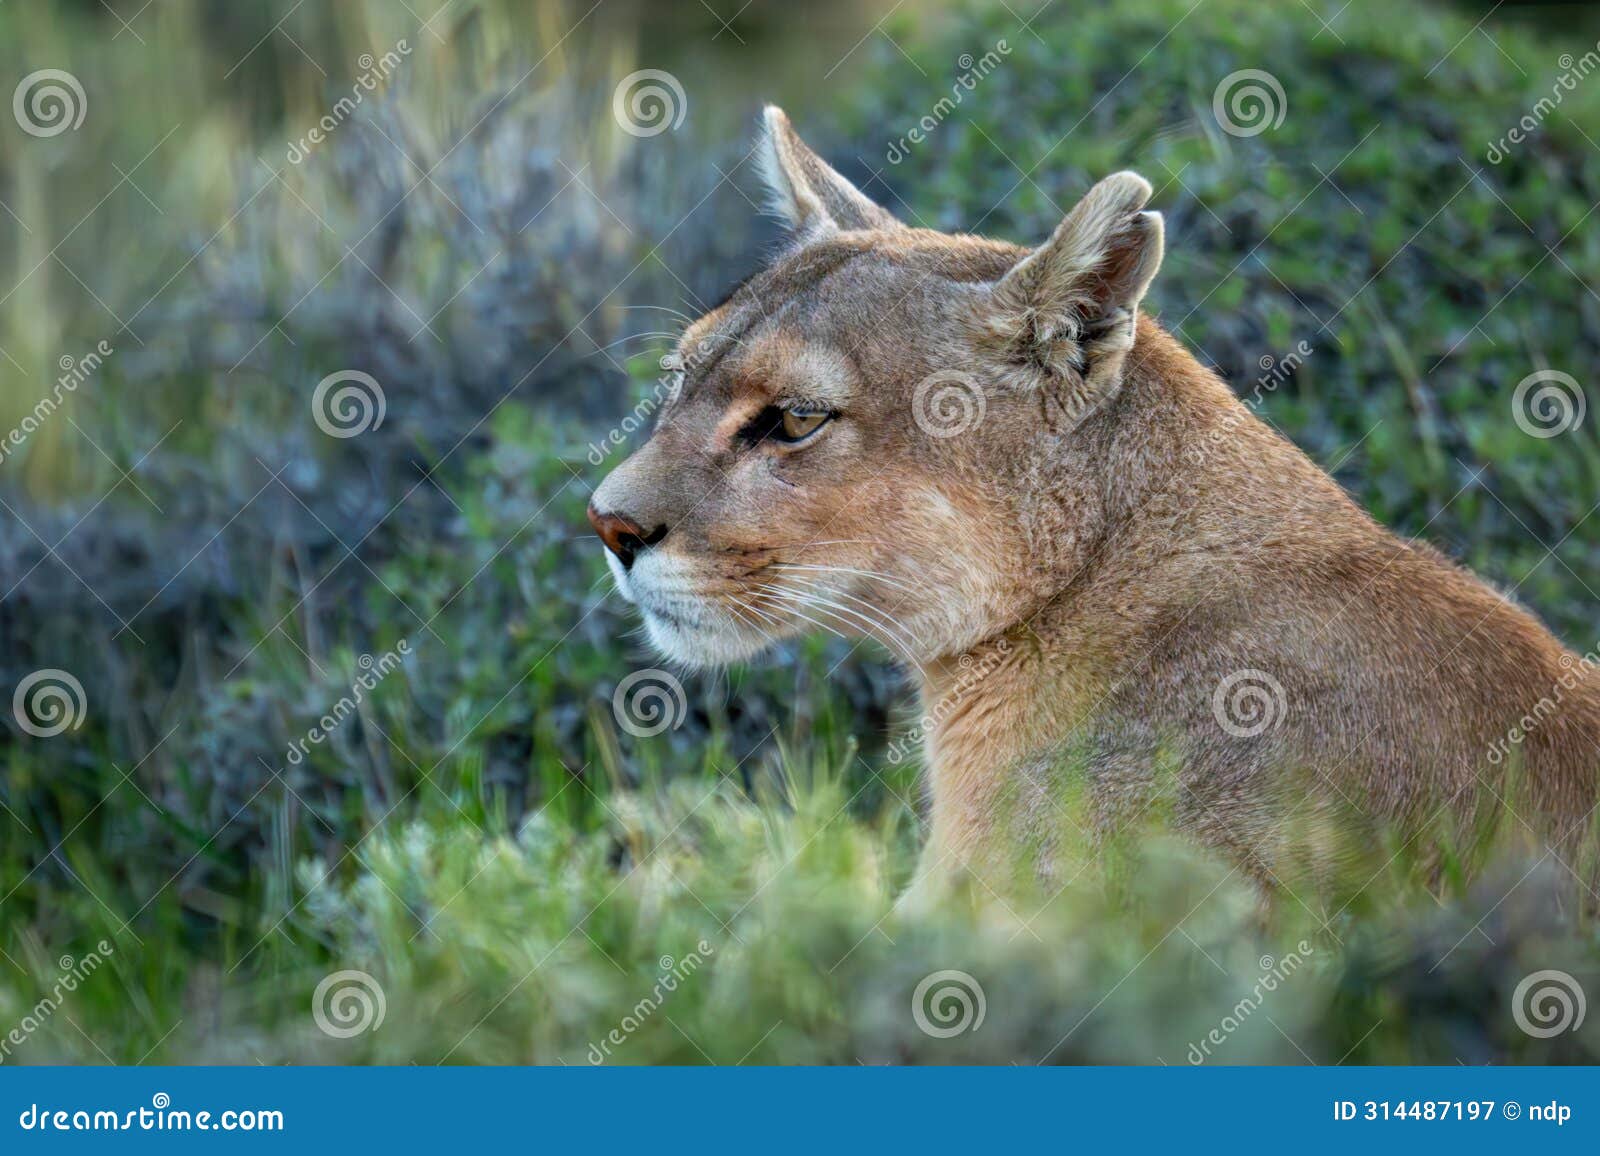 close-up of puma sitting with bright catchlight